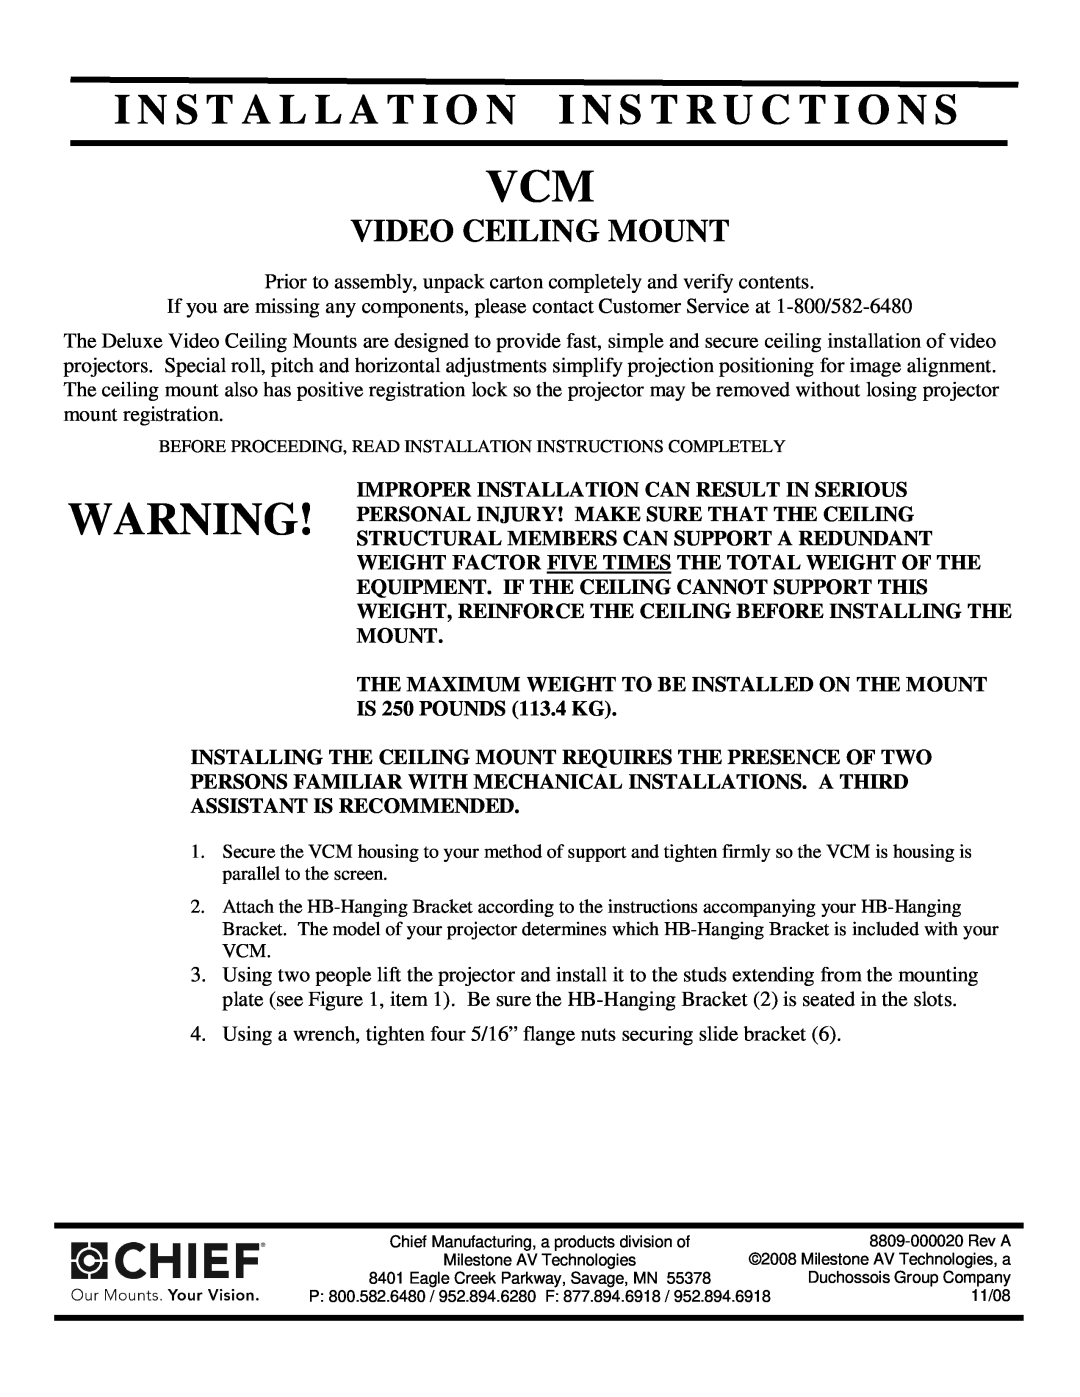 Chief Manufacturing VCM installation instructions I N S T A L L A T I O N I N S T R U C T I O N S, Video Ceiling Mount 